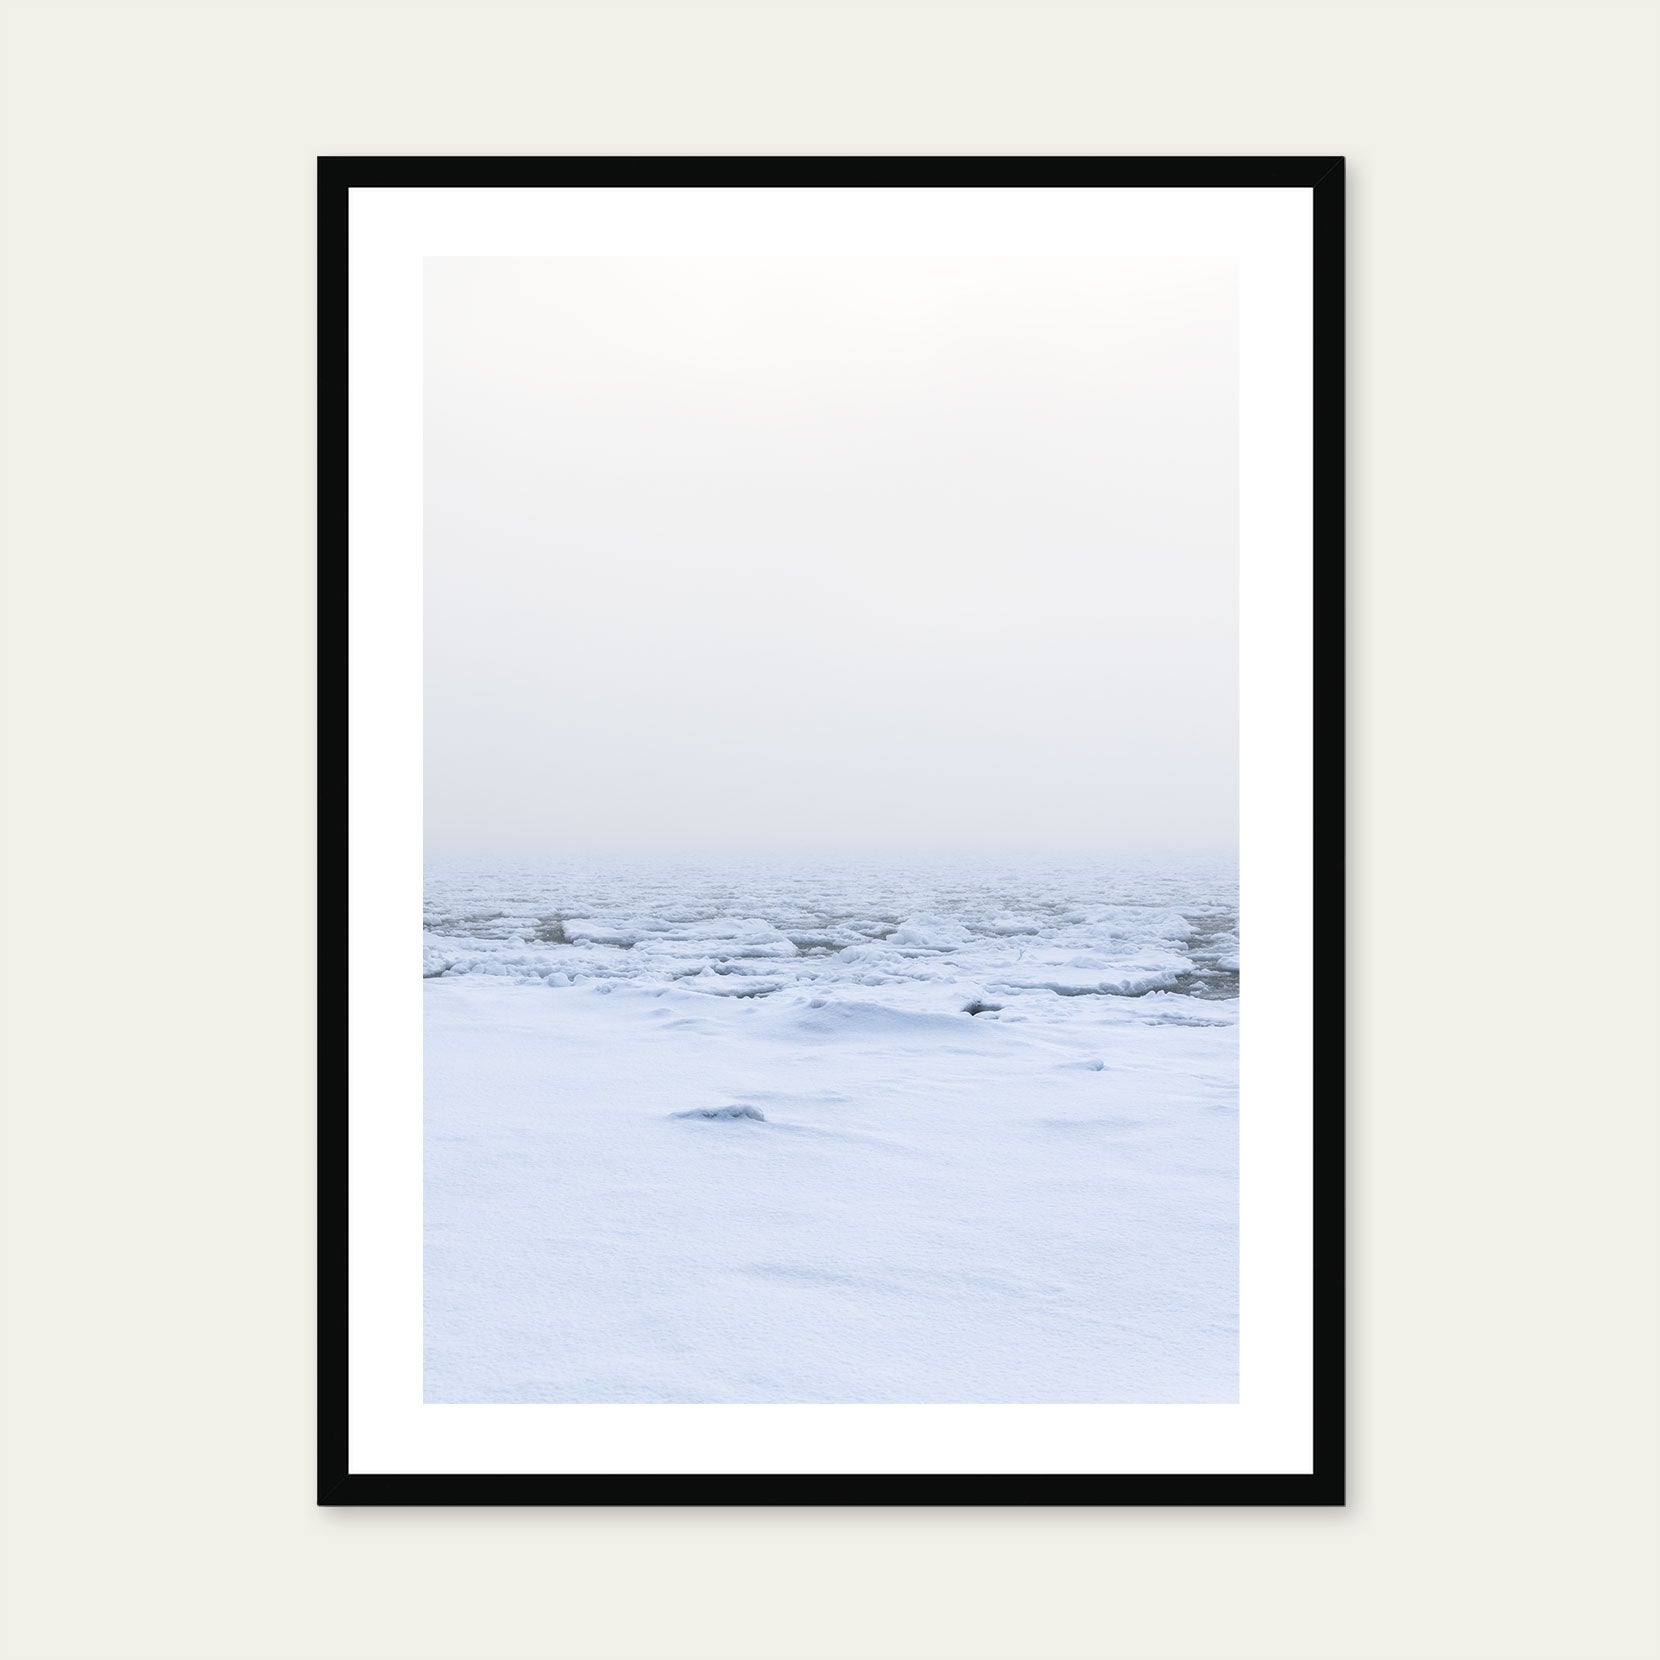 A black framed print of a snow covered shoreline with fog